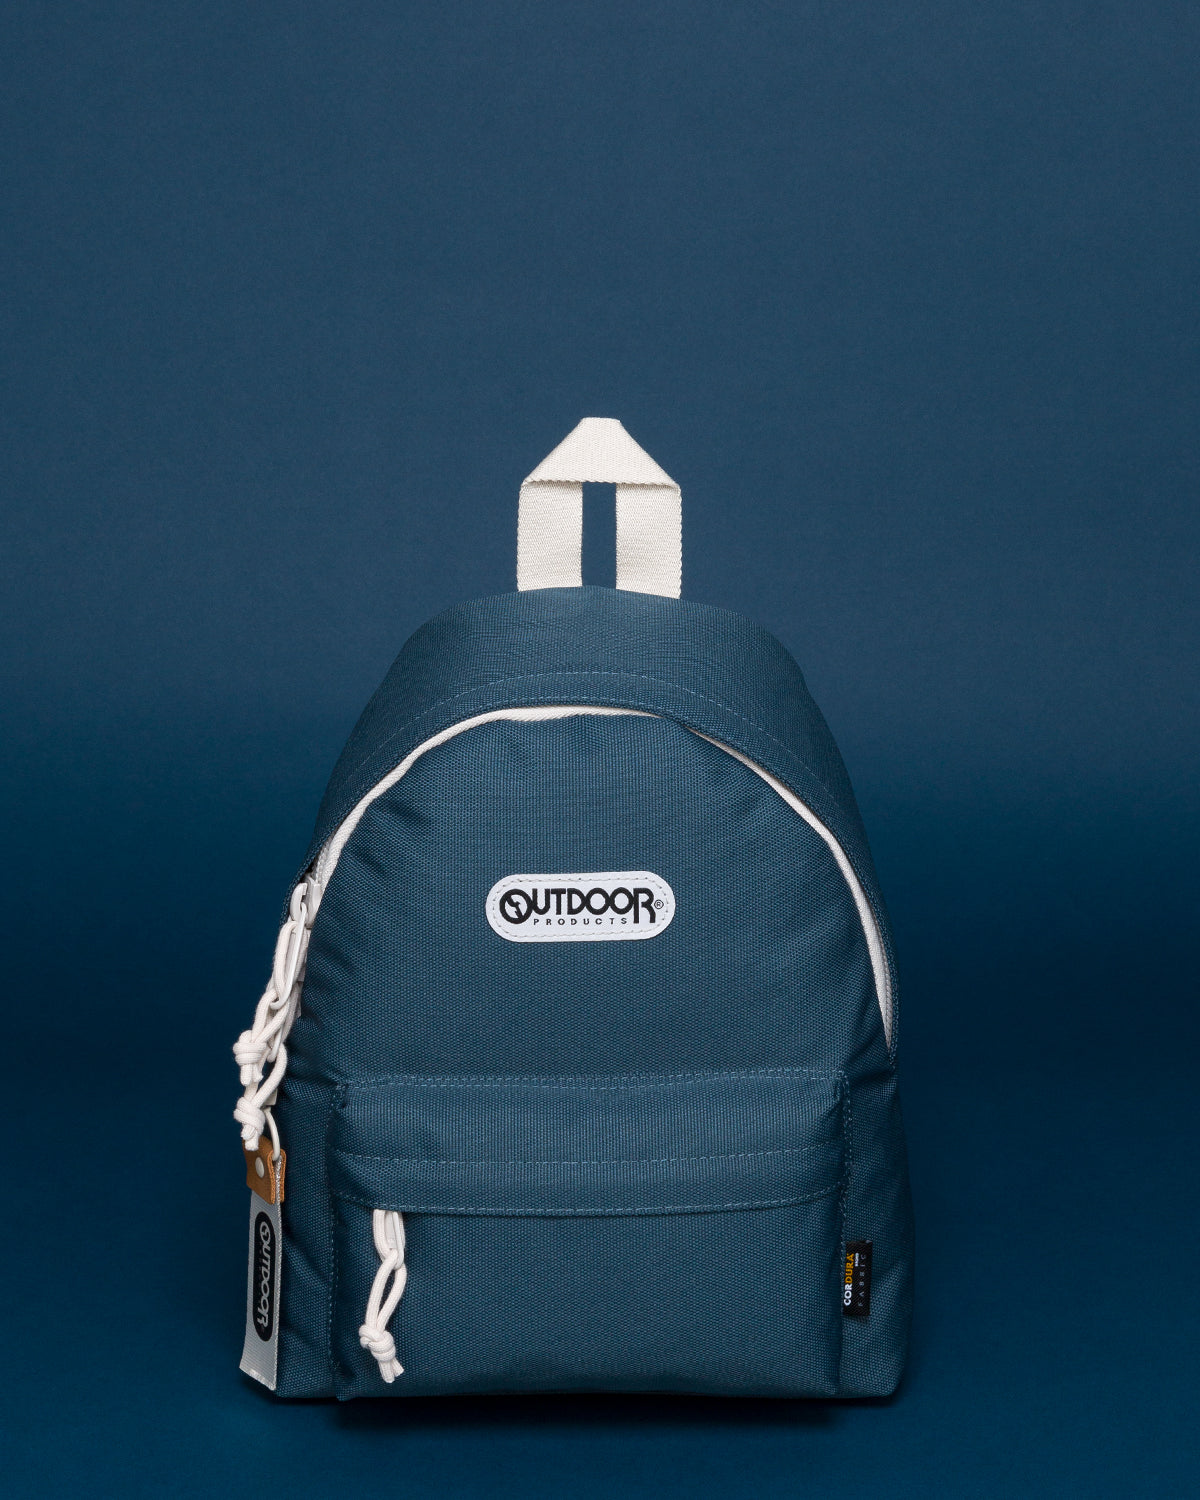 Synthetic Minissimi Backpack with flap and outside pockets. B2B Lugano